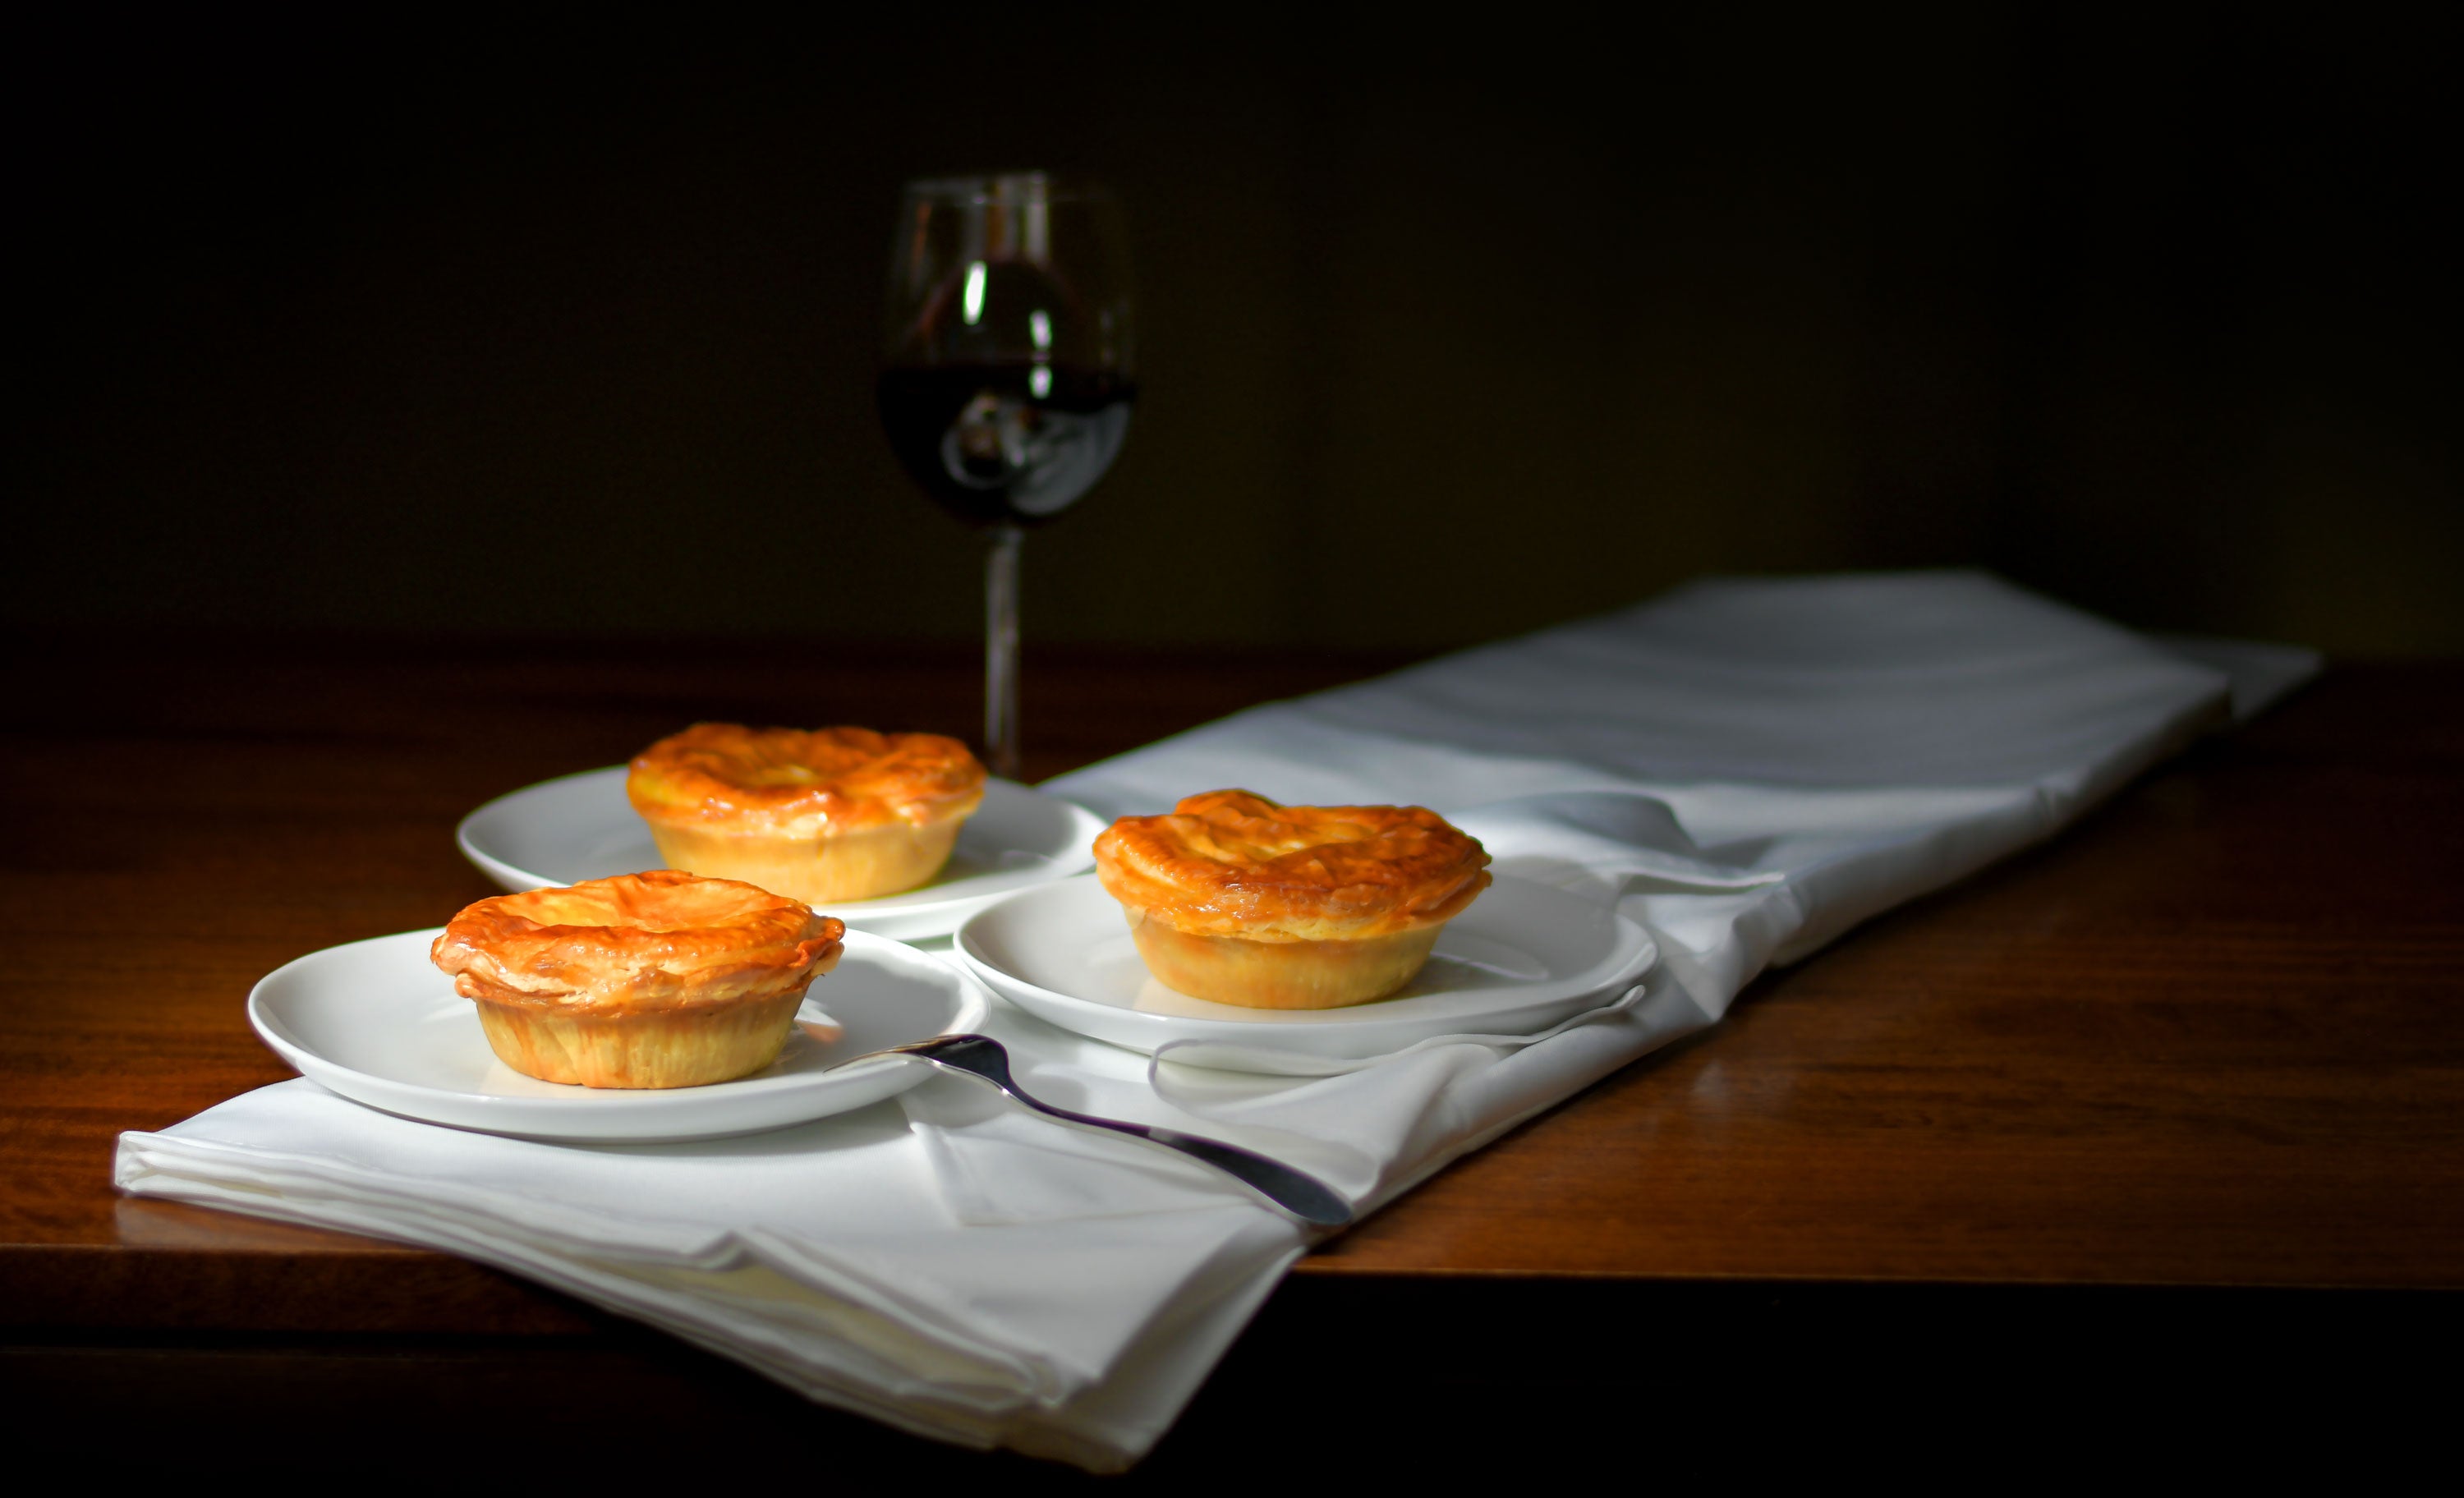 Three savory pies on a table with glass of wine